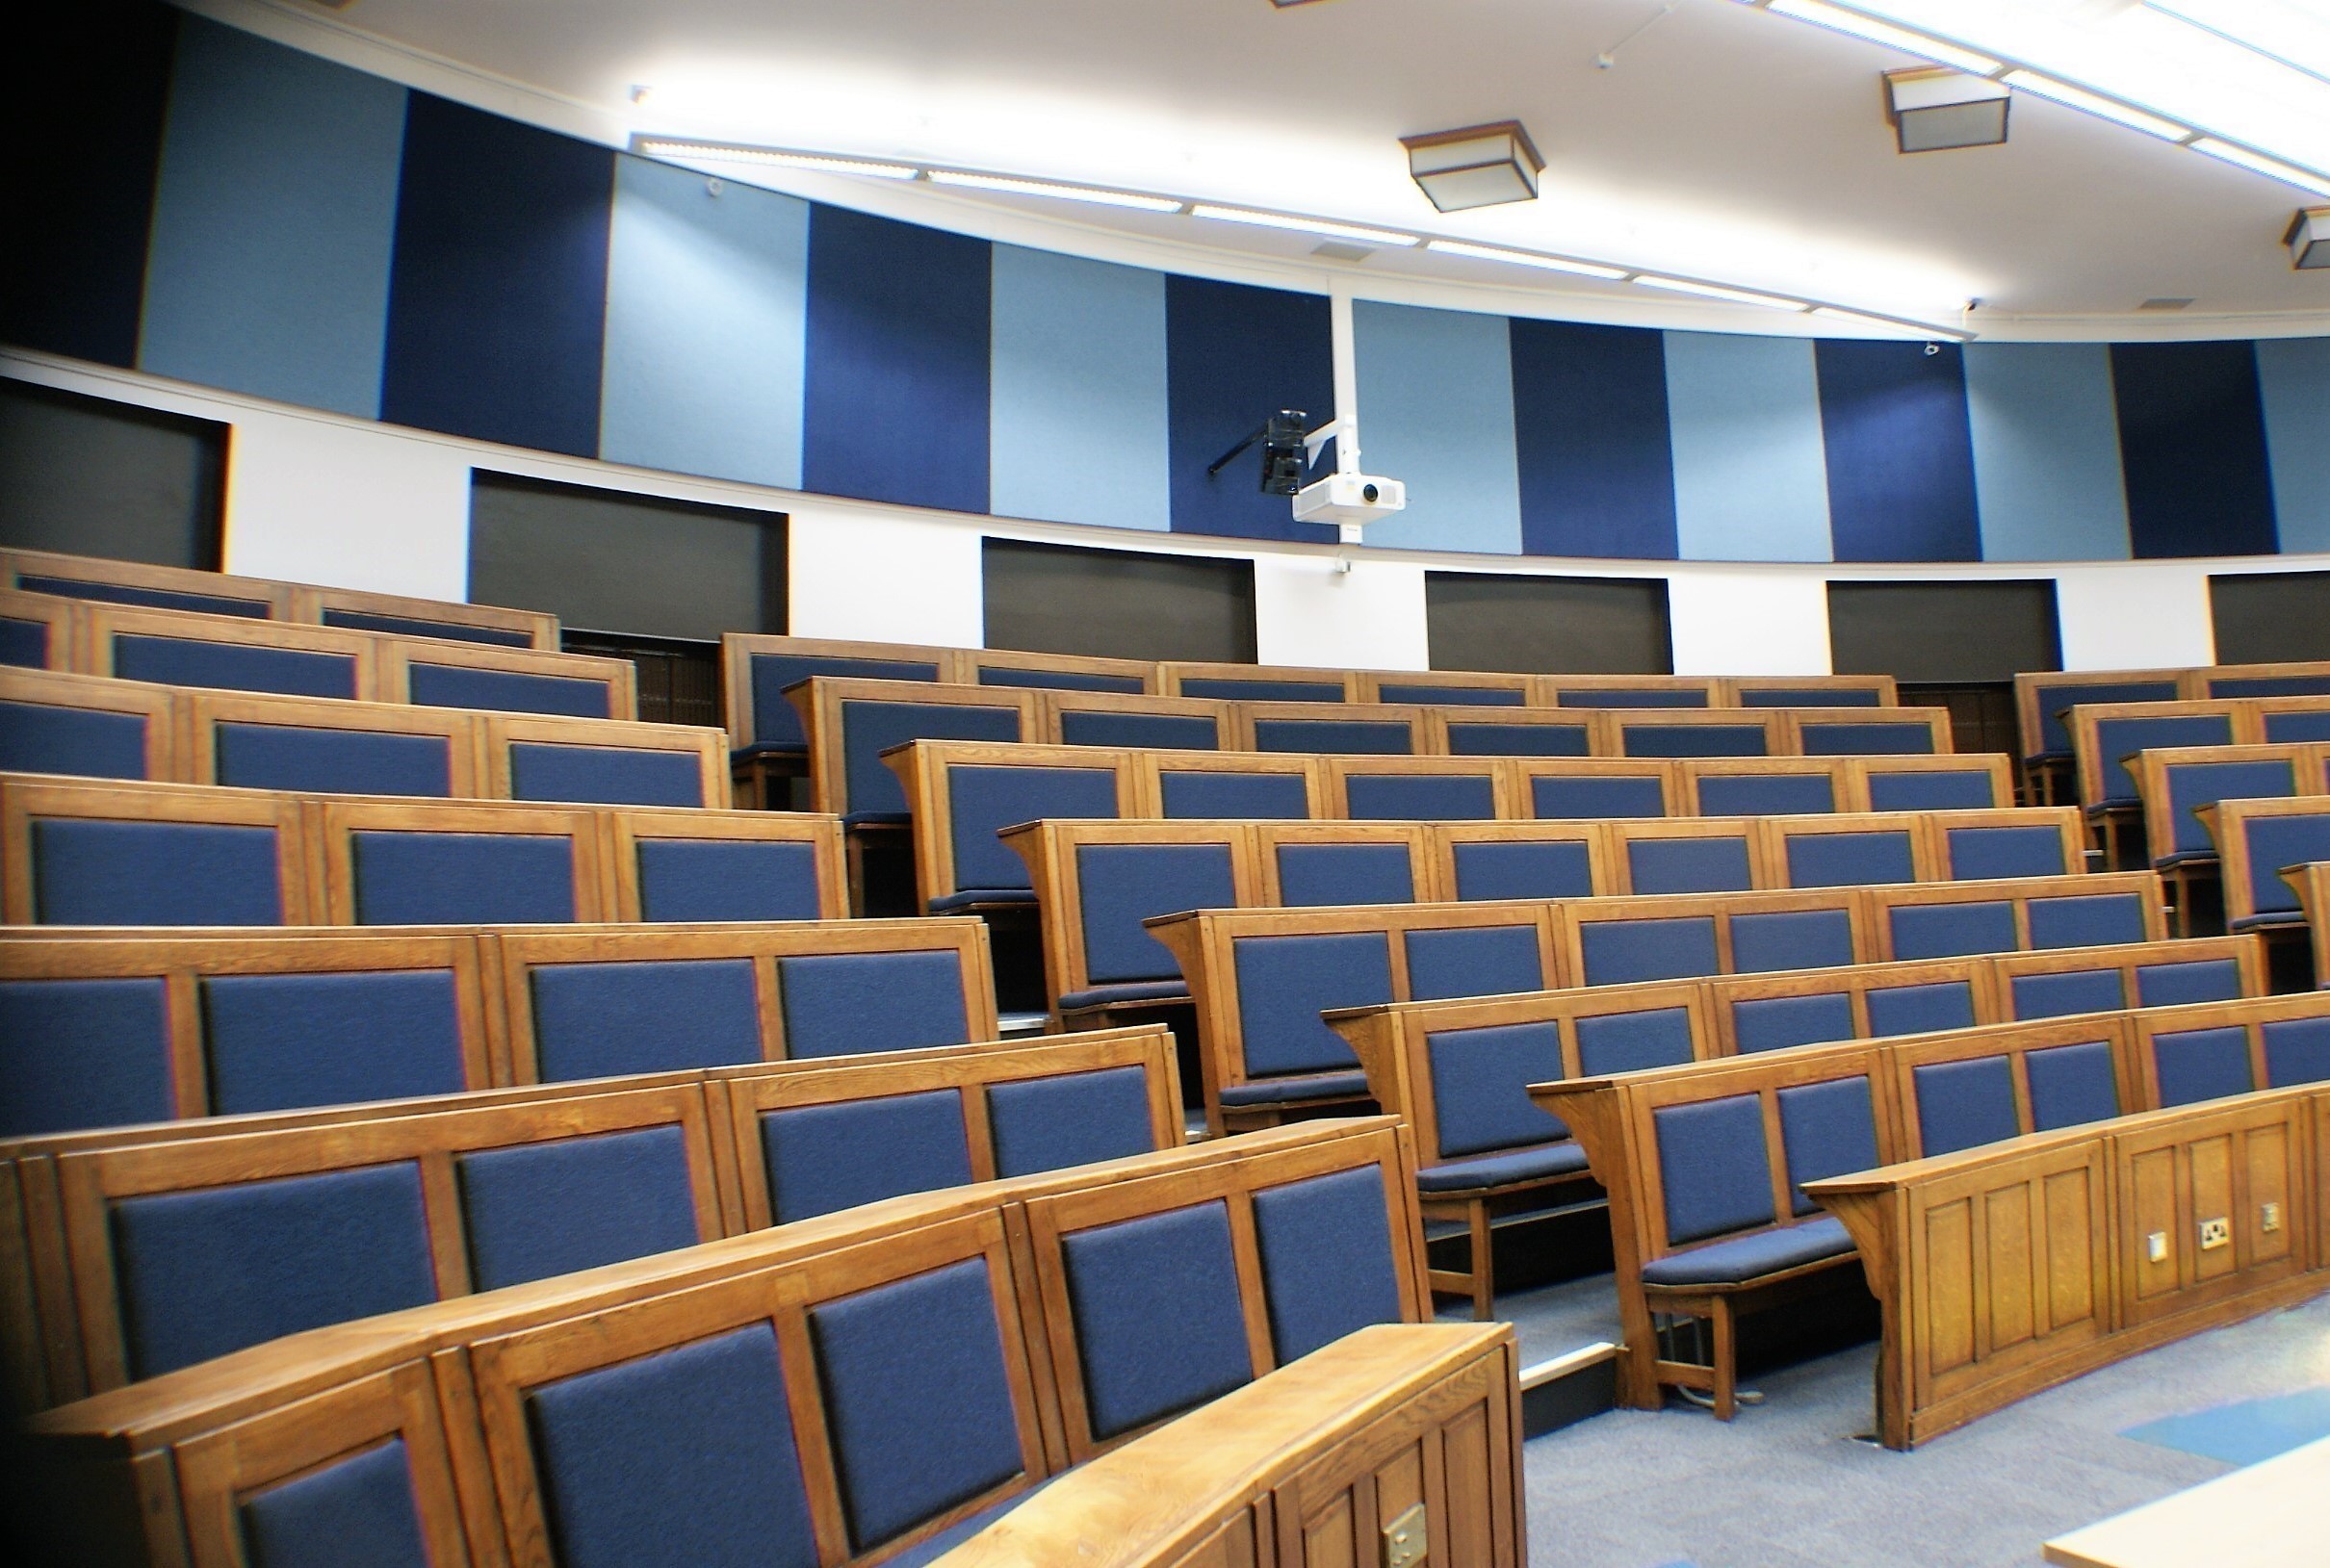  Lecture Theatre A, Chemistry Building - CTS 2017 